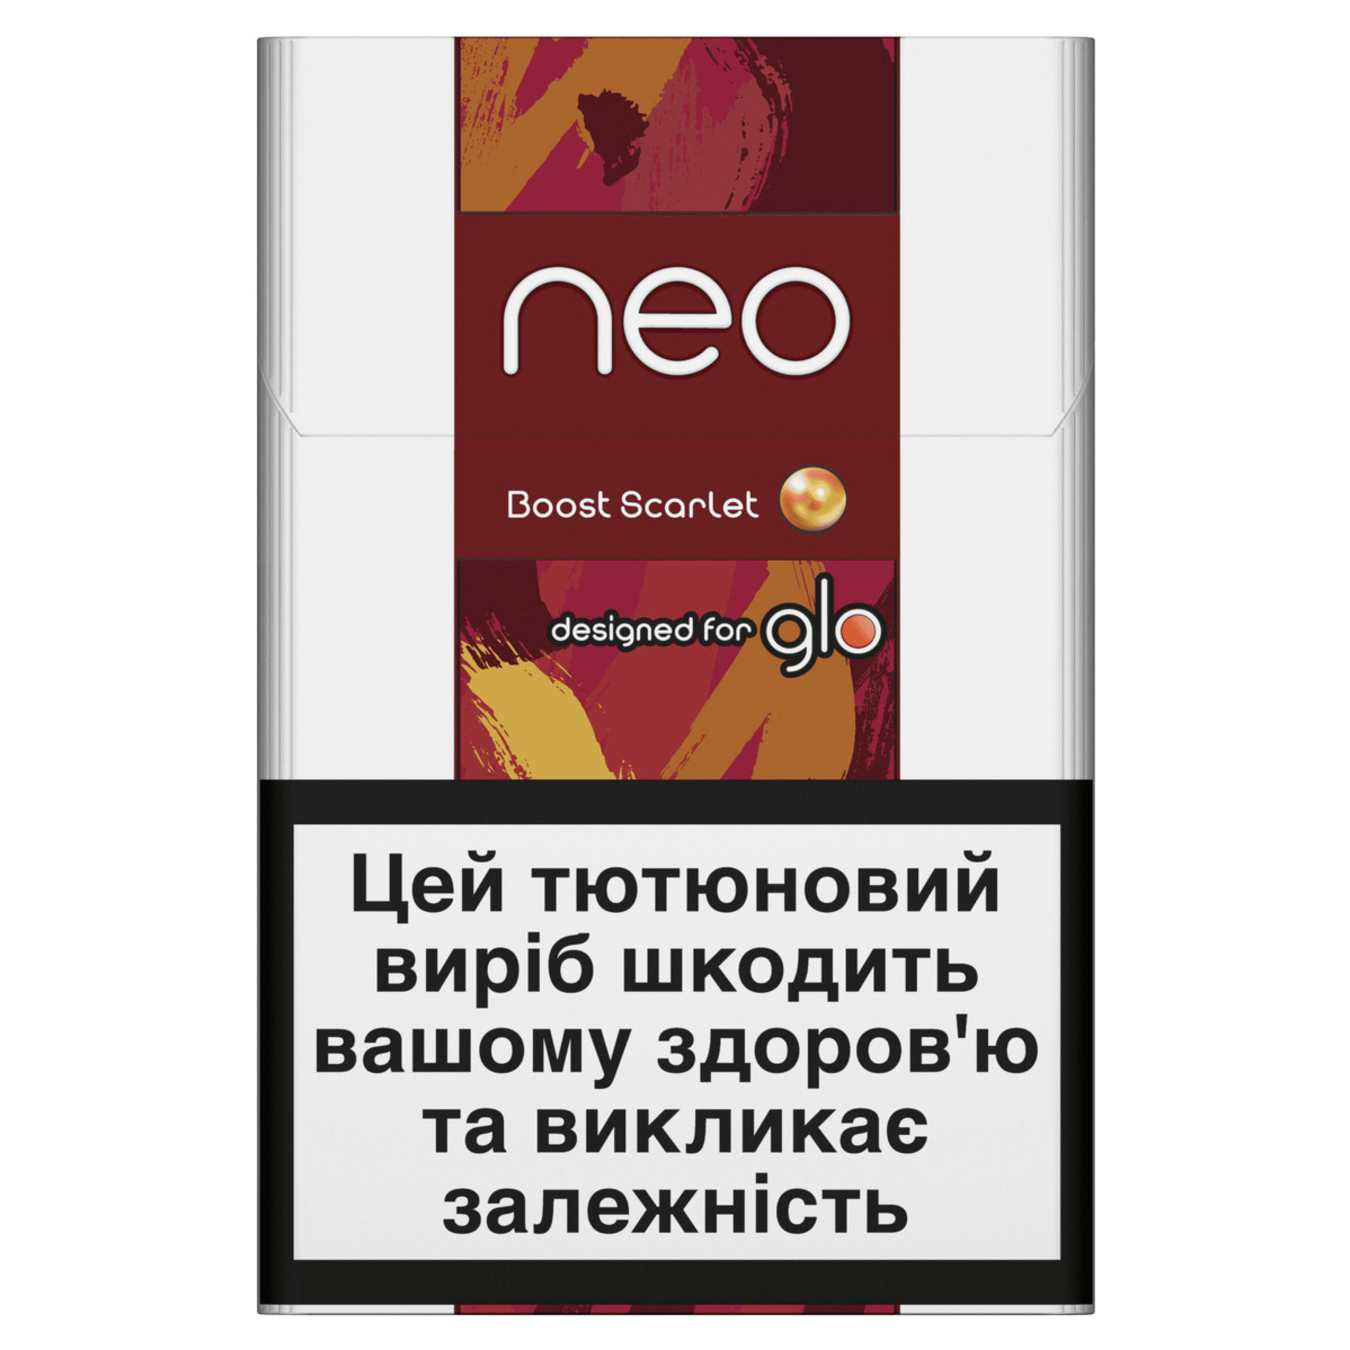 Kent Neo Boost Scarlet Sticks 20 pcs (the price is indicated without excise tax)